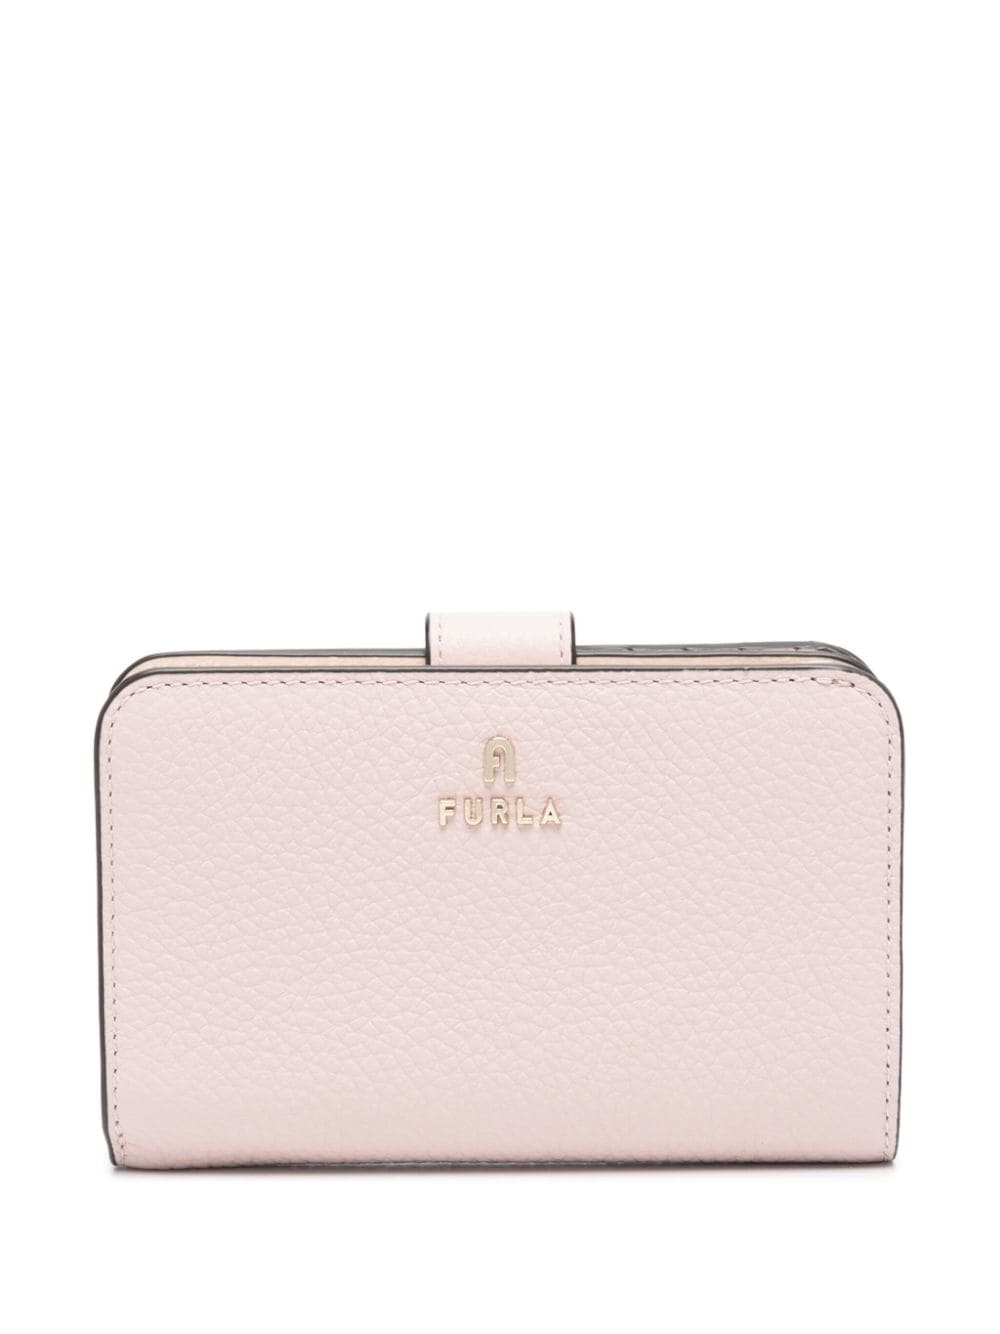 Furla Camelia M Leather Wallet In Pink